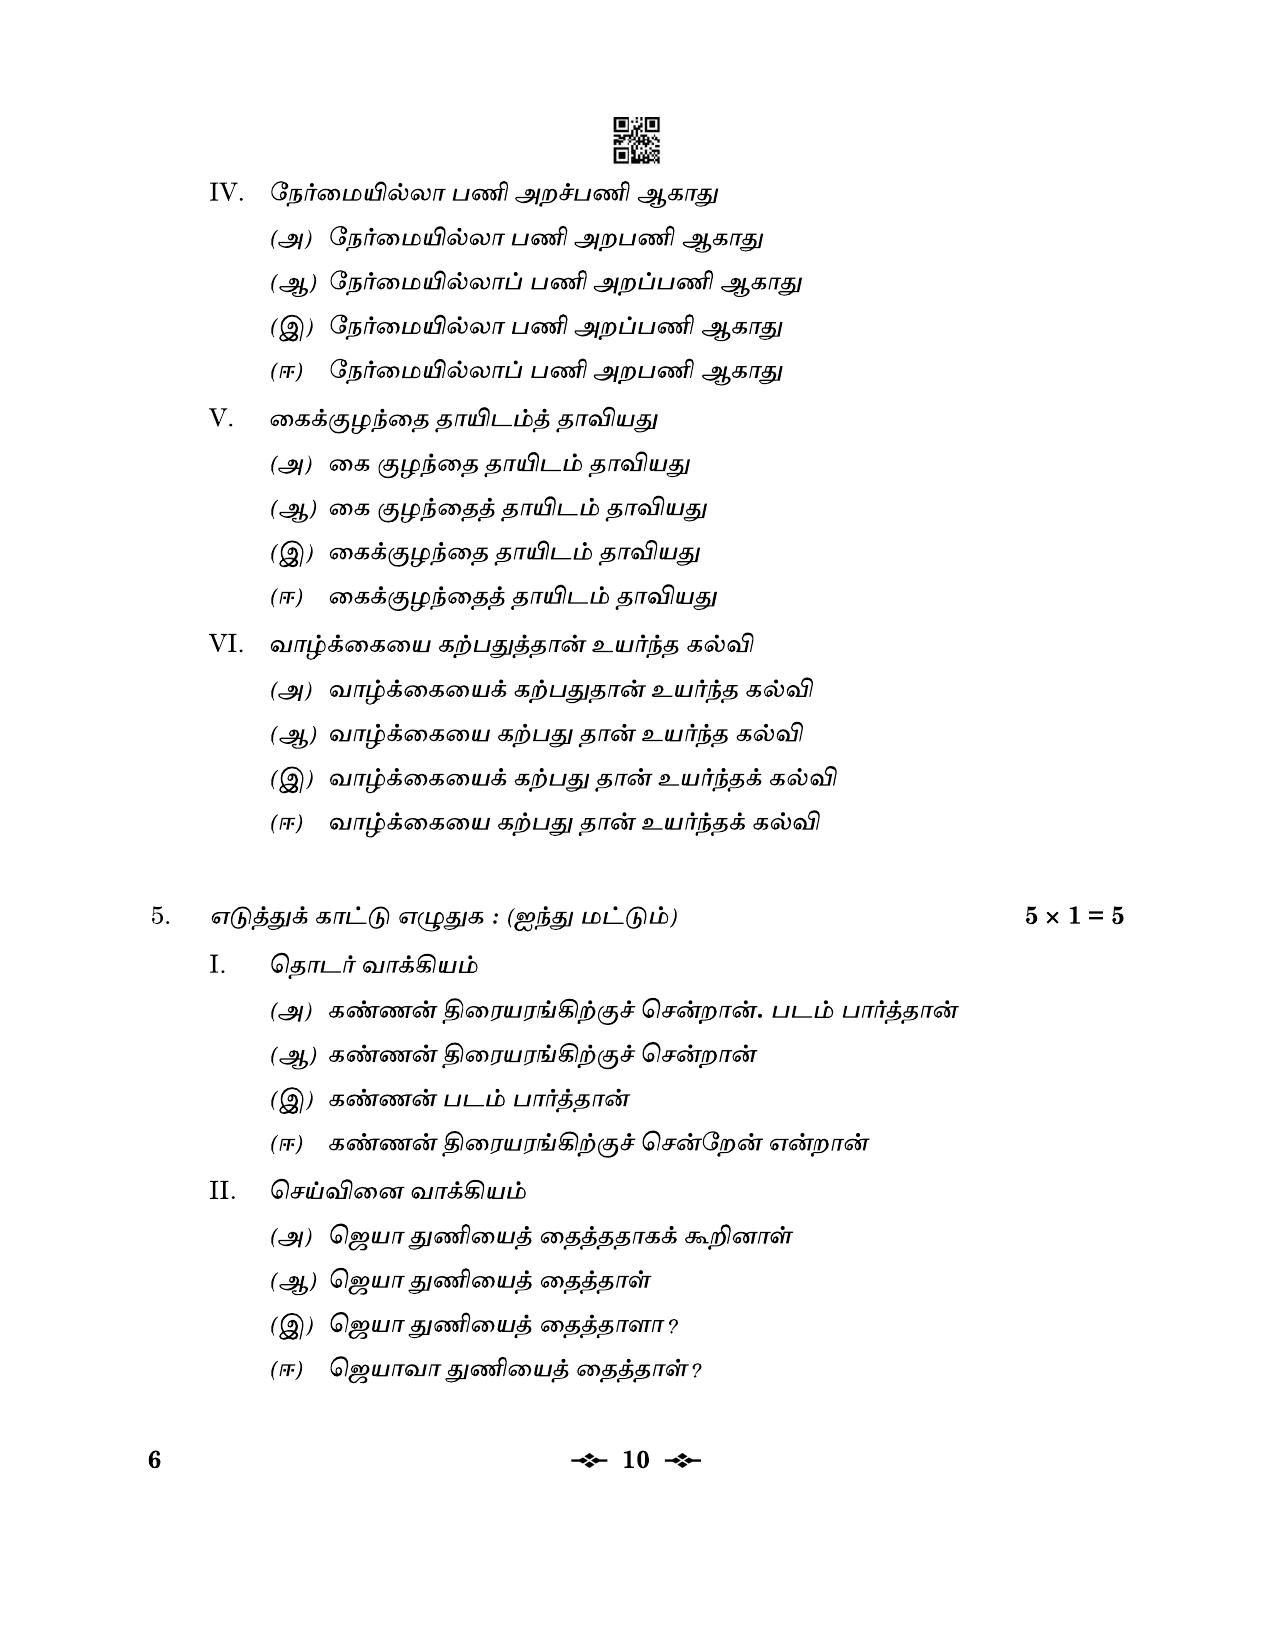 CBSE Class 12 6_Tamil 2023 Question Paper - Page 10